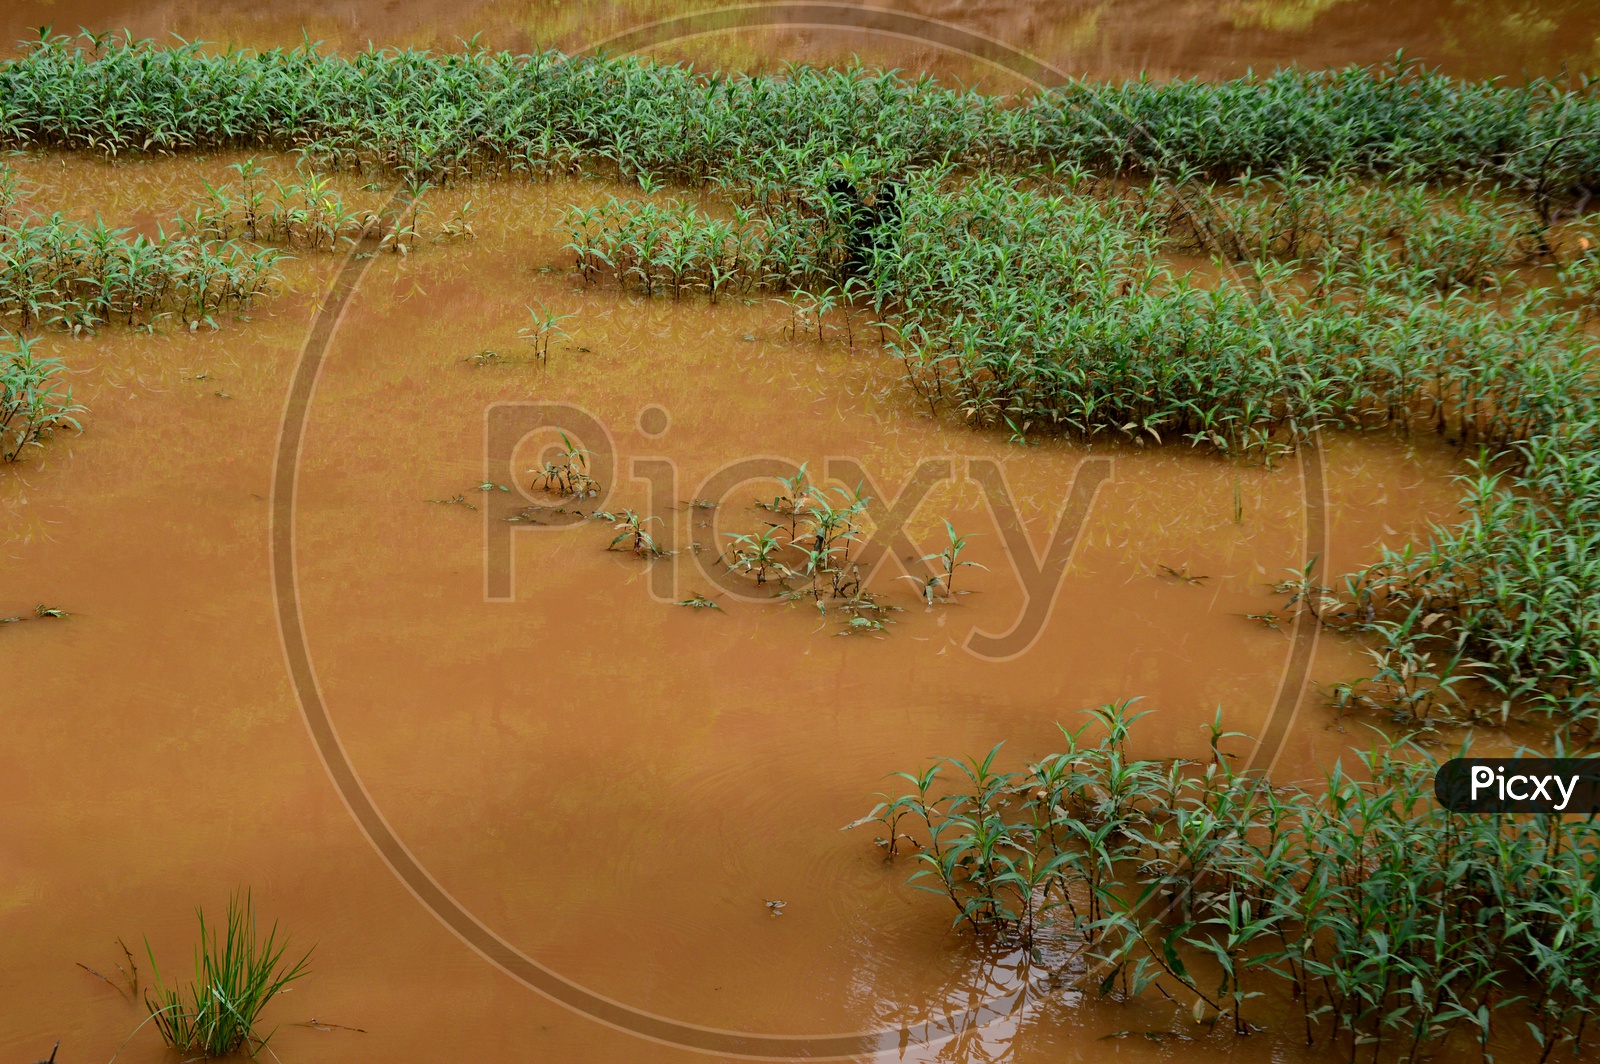 Stagnant flood water with plants